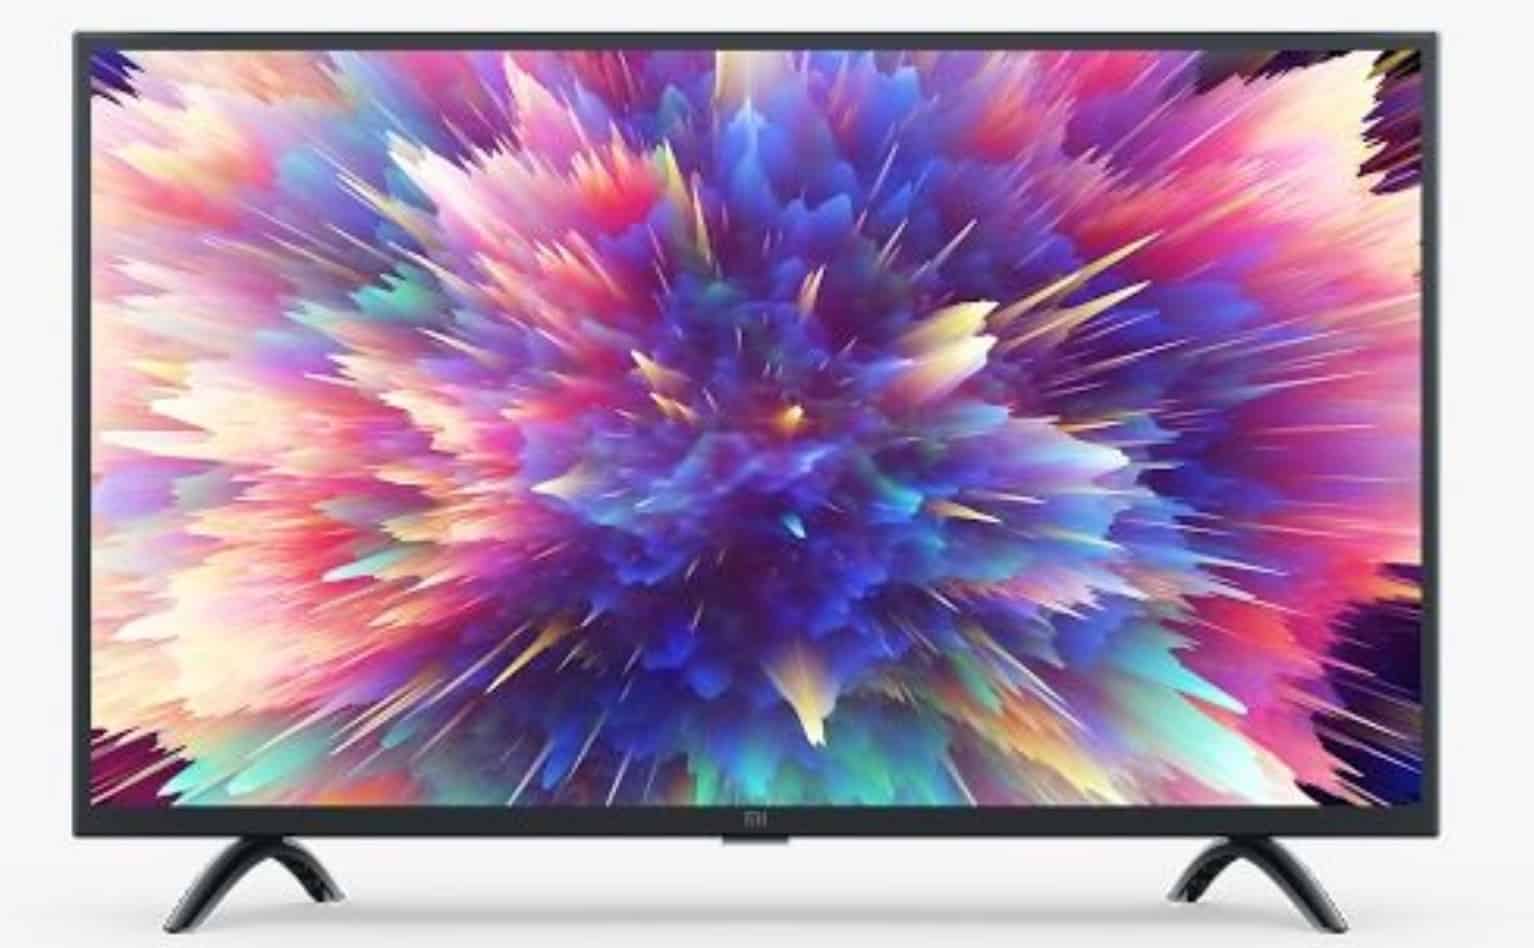 New Mi TV Reportedly Spotted on Google Play Console: Suggests Imminent Launch, Key Specs Also Revealed